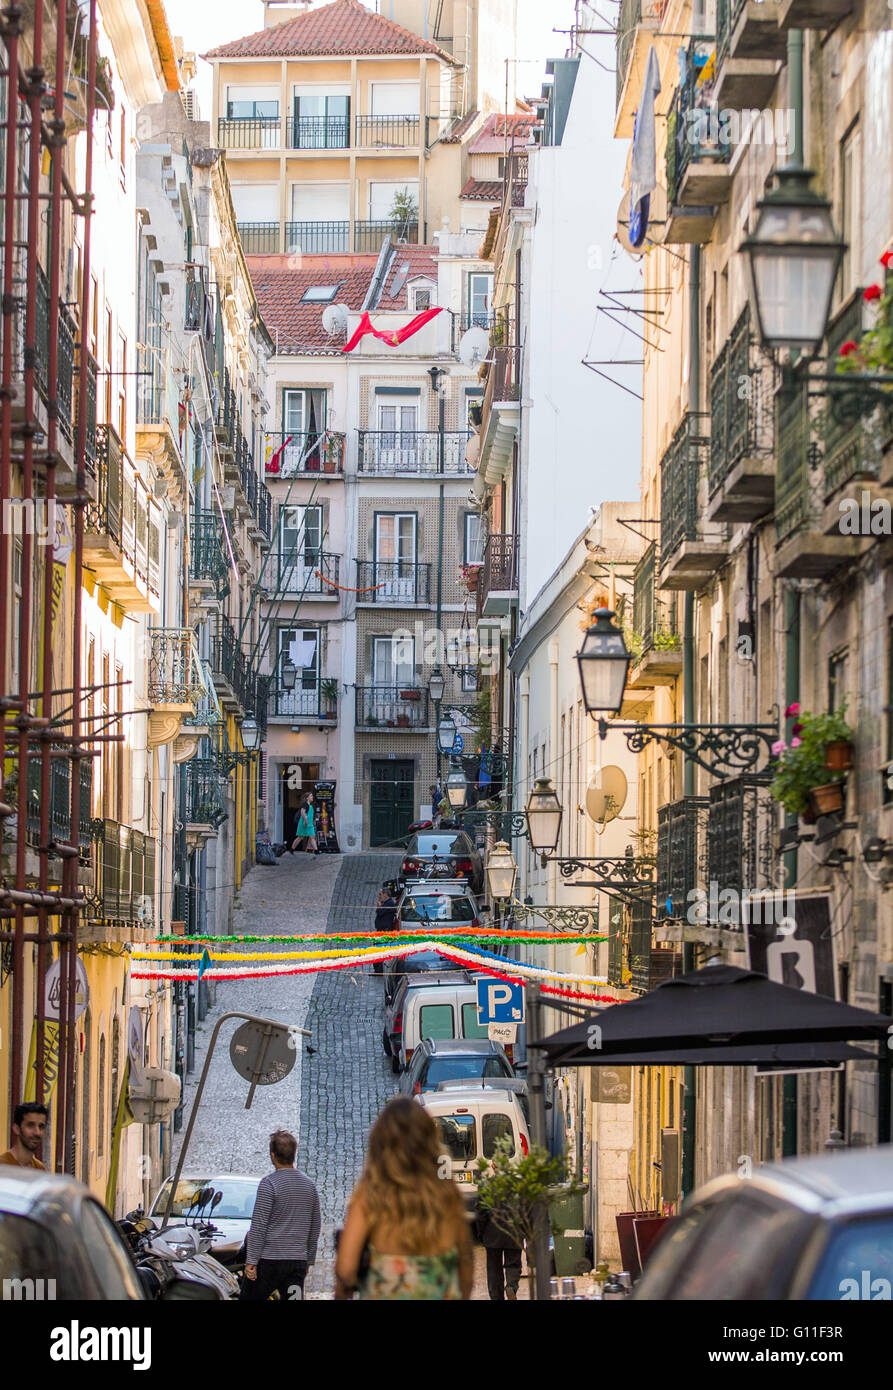 Lisbon, Portugal. 27th May, 2015. The historic district of Lisbon, Portugal, 27 May 2015. Photo: JENS BUETTNER/dpa - NO WIRE SERVICE -/dpa/Alamy Live News Stock Photo